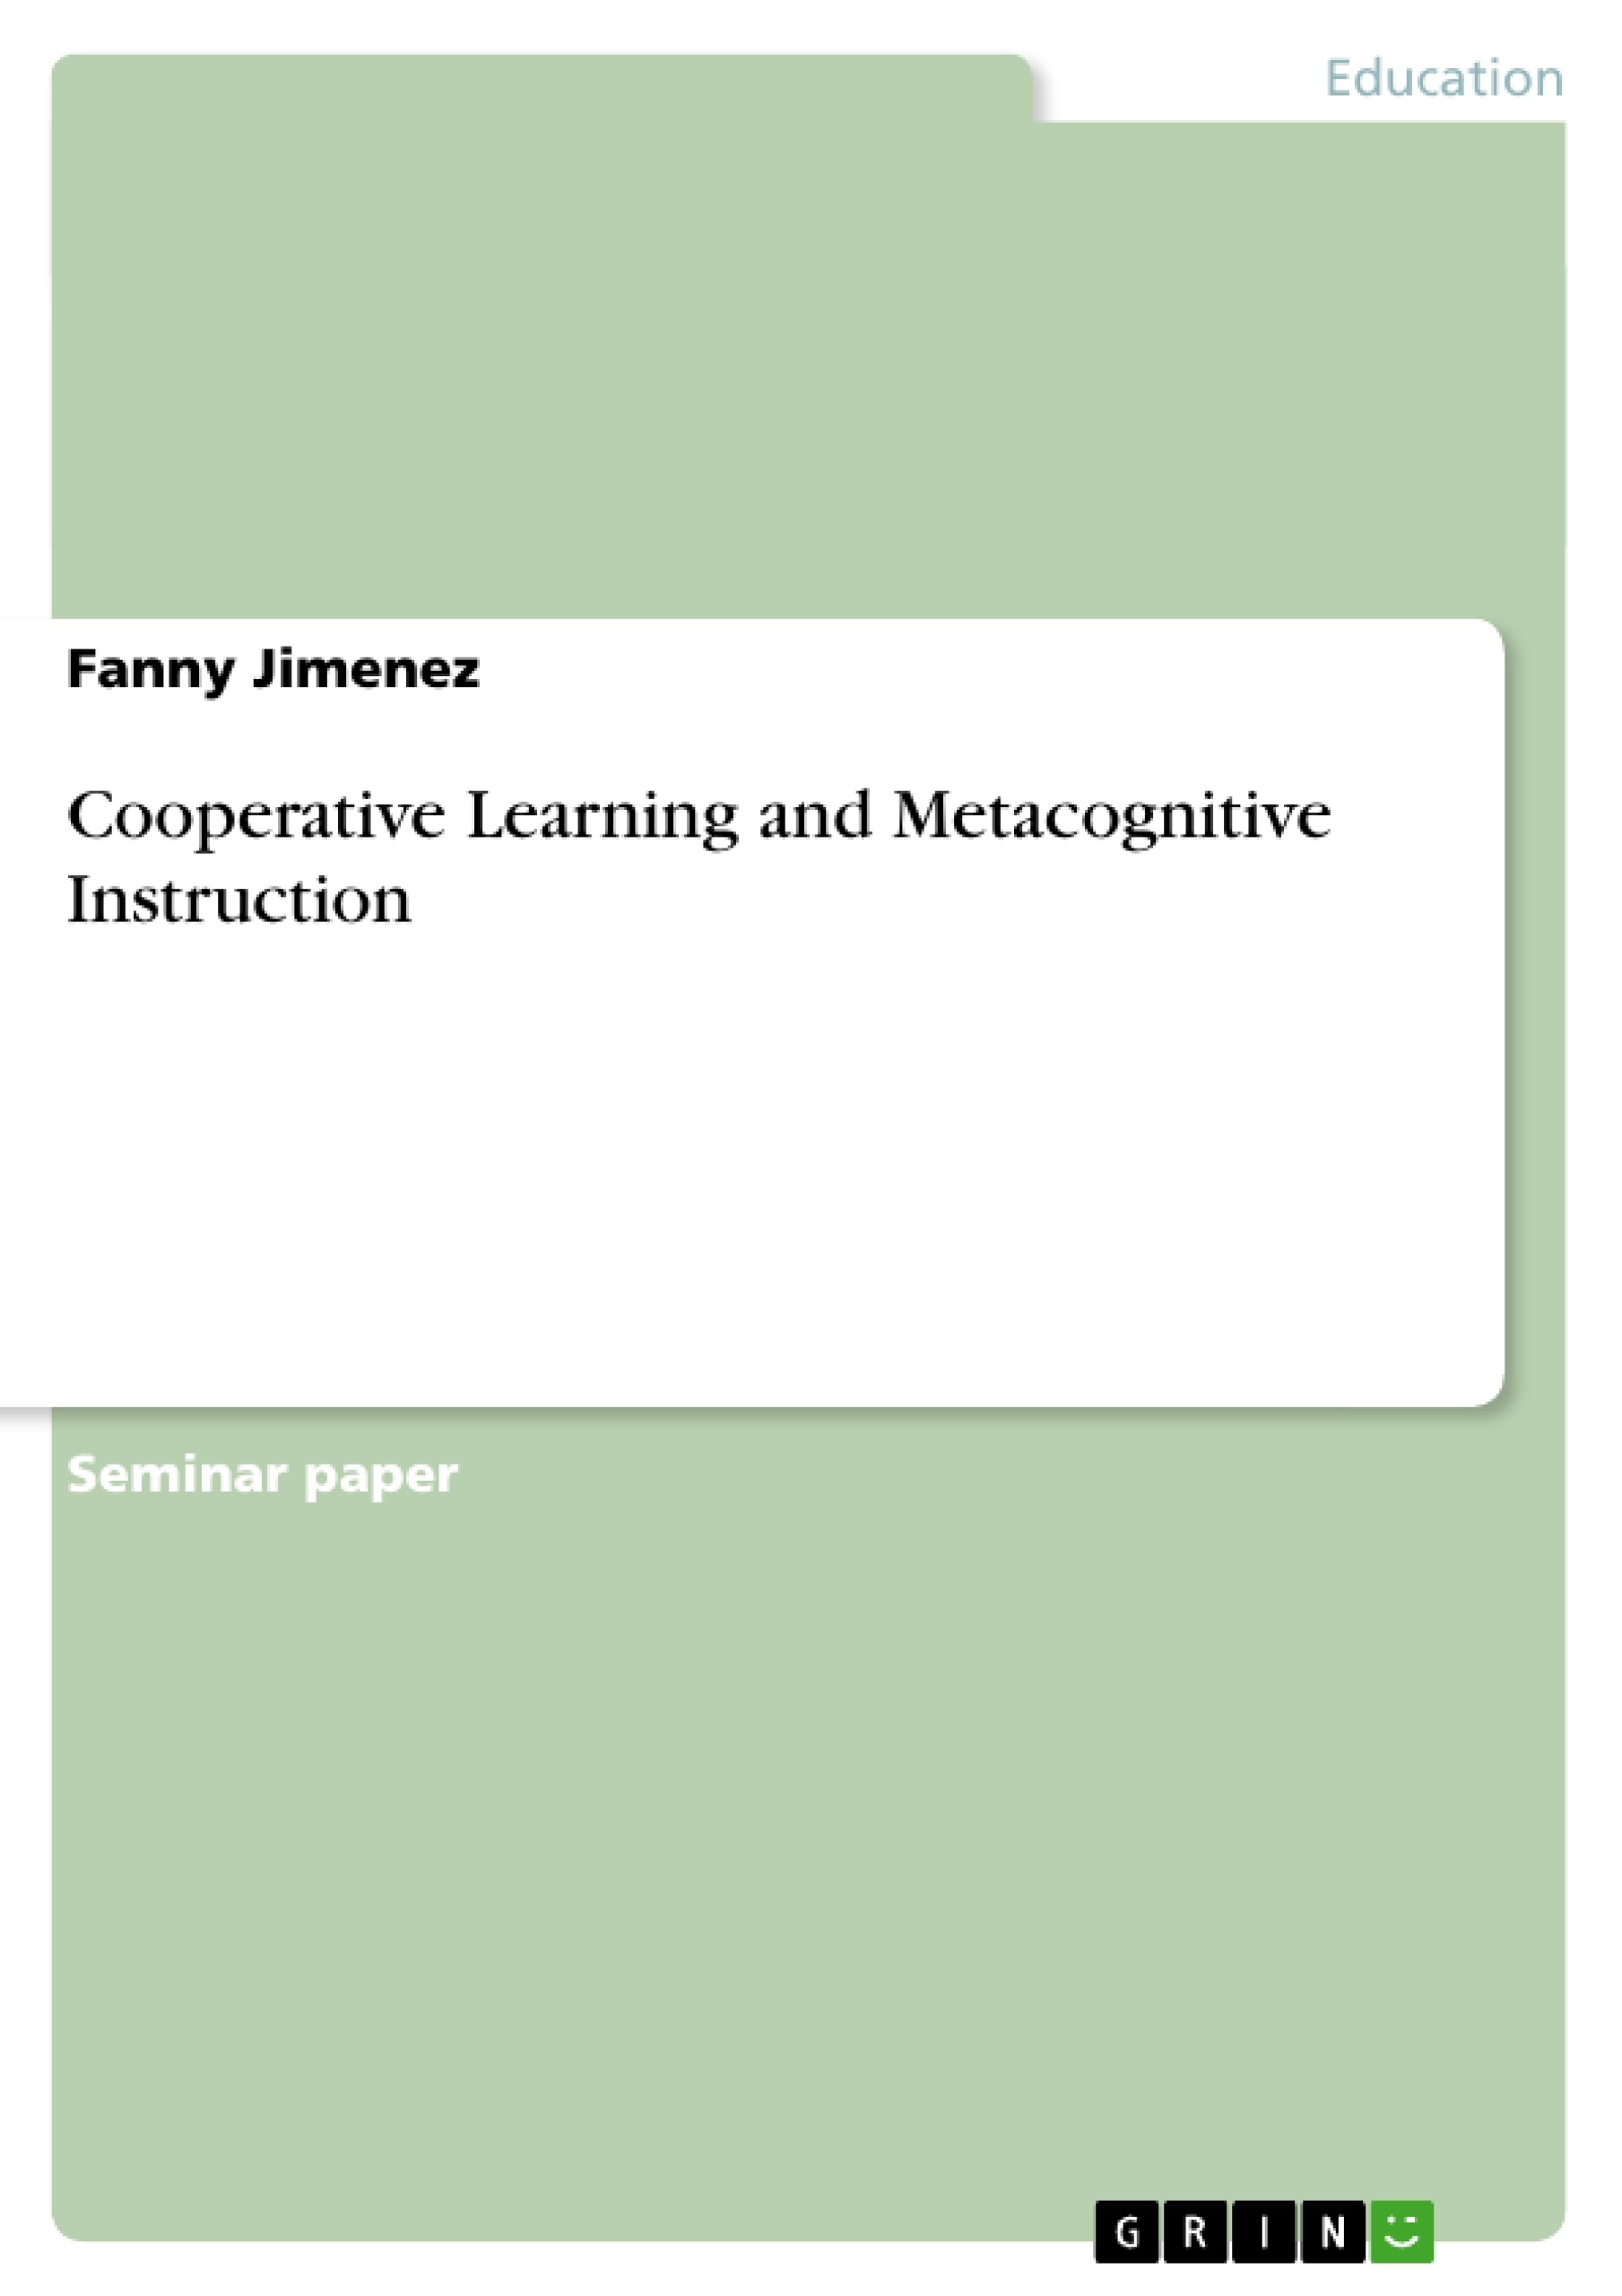 Cooperative　and　Learning　Metacognitive　Instruction　GRIN